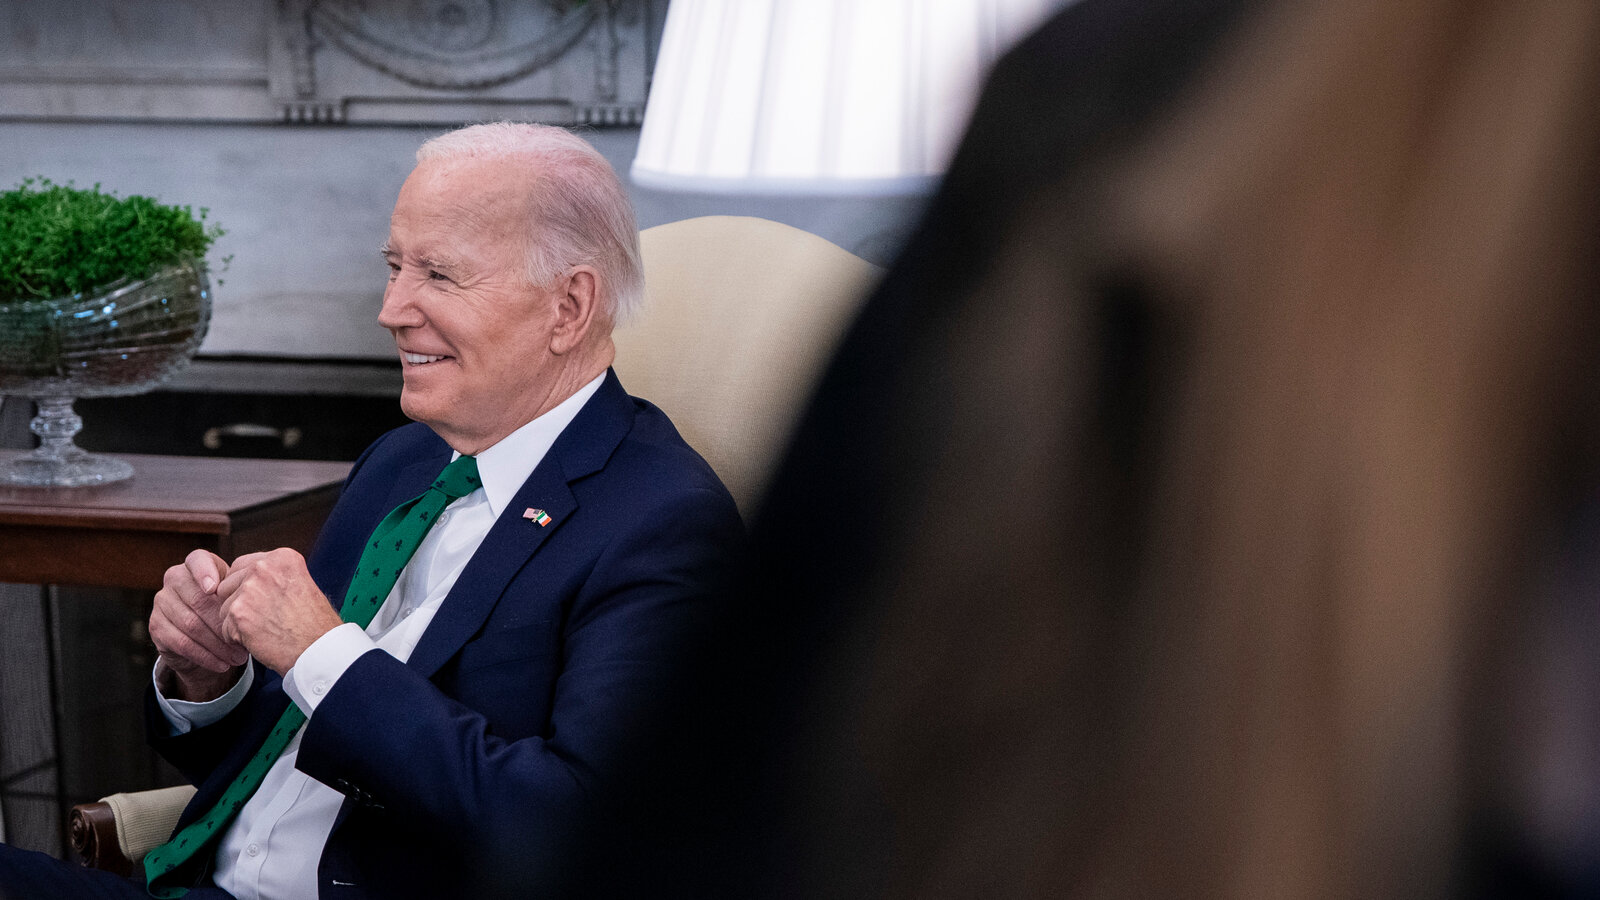 Biden's jests at Gridiron Club mark return to jovial political tradition (Credits: The NY Times)